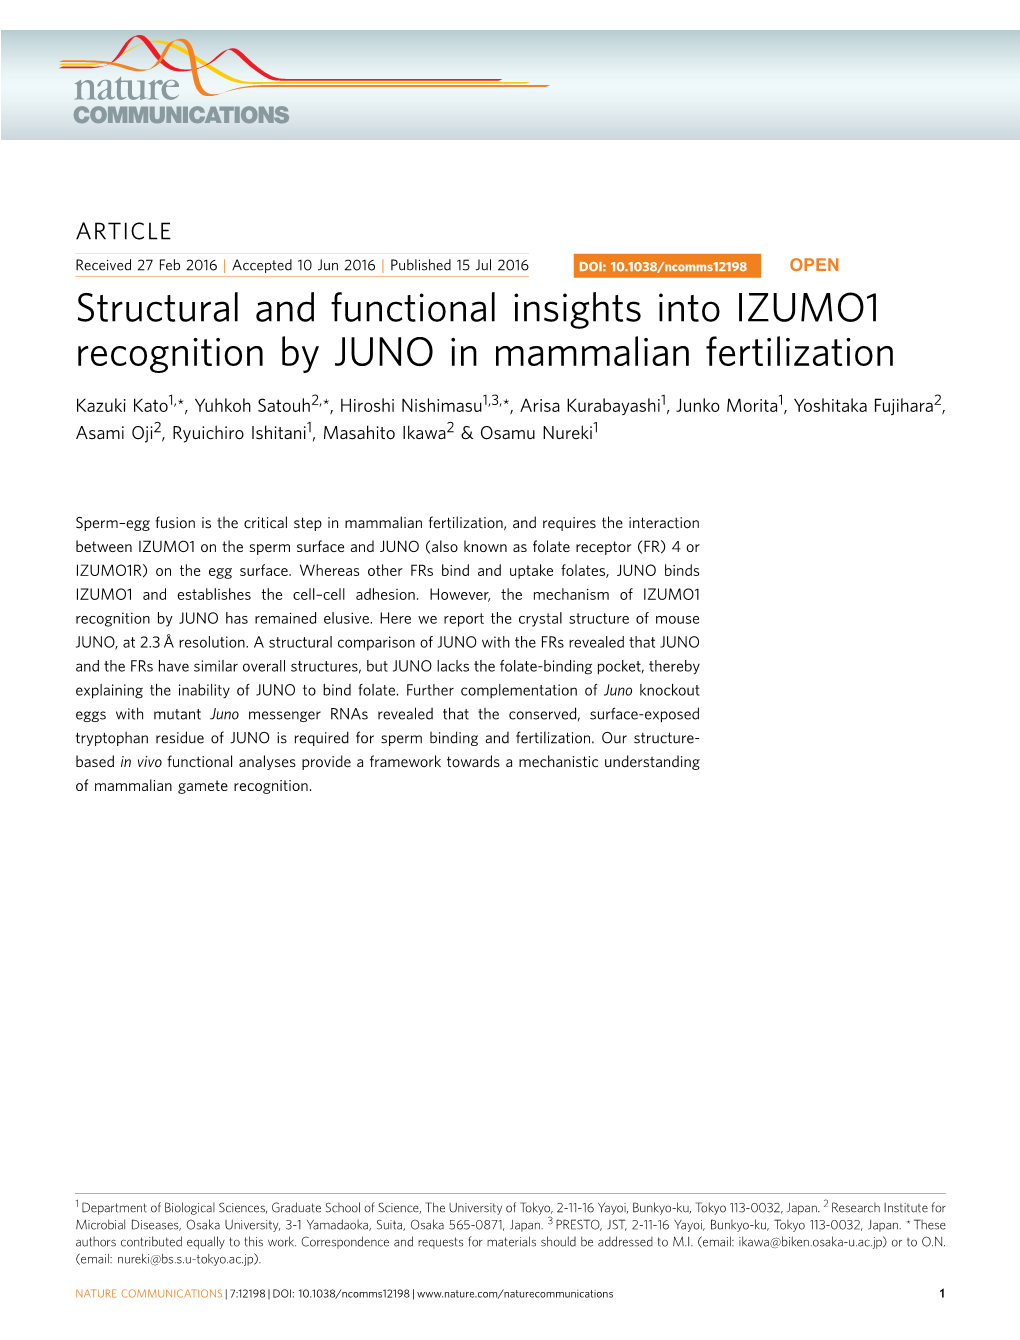 Structural and Functional Insights Into IZUMO1 Recognition by JUNO in Mammalian Fertilization